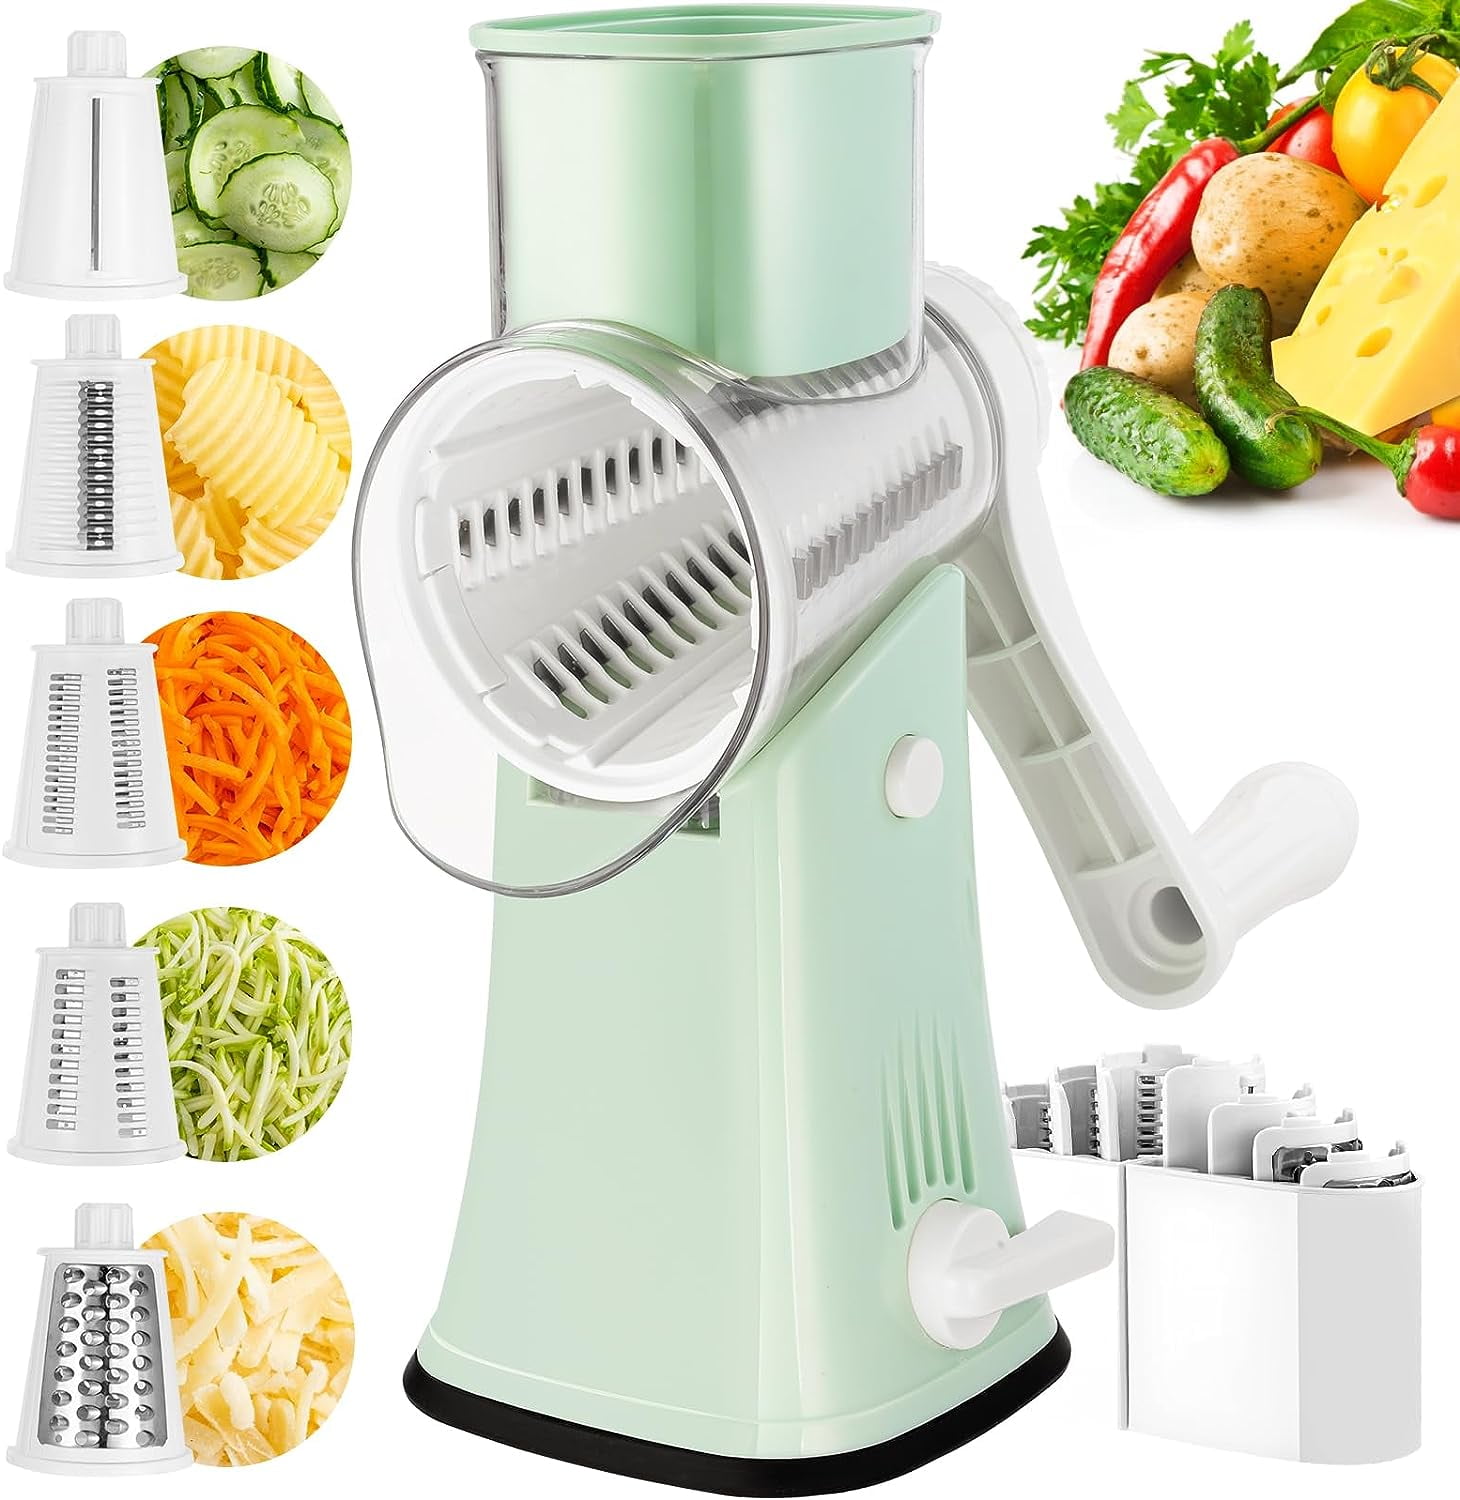 Cheese Grater With Handle, Rotary Cheese Grater, Manual Stainless